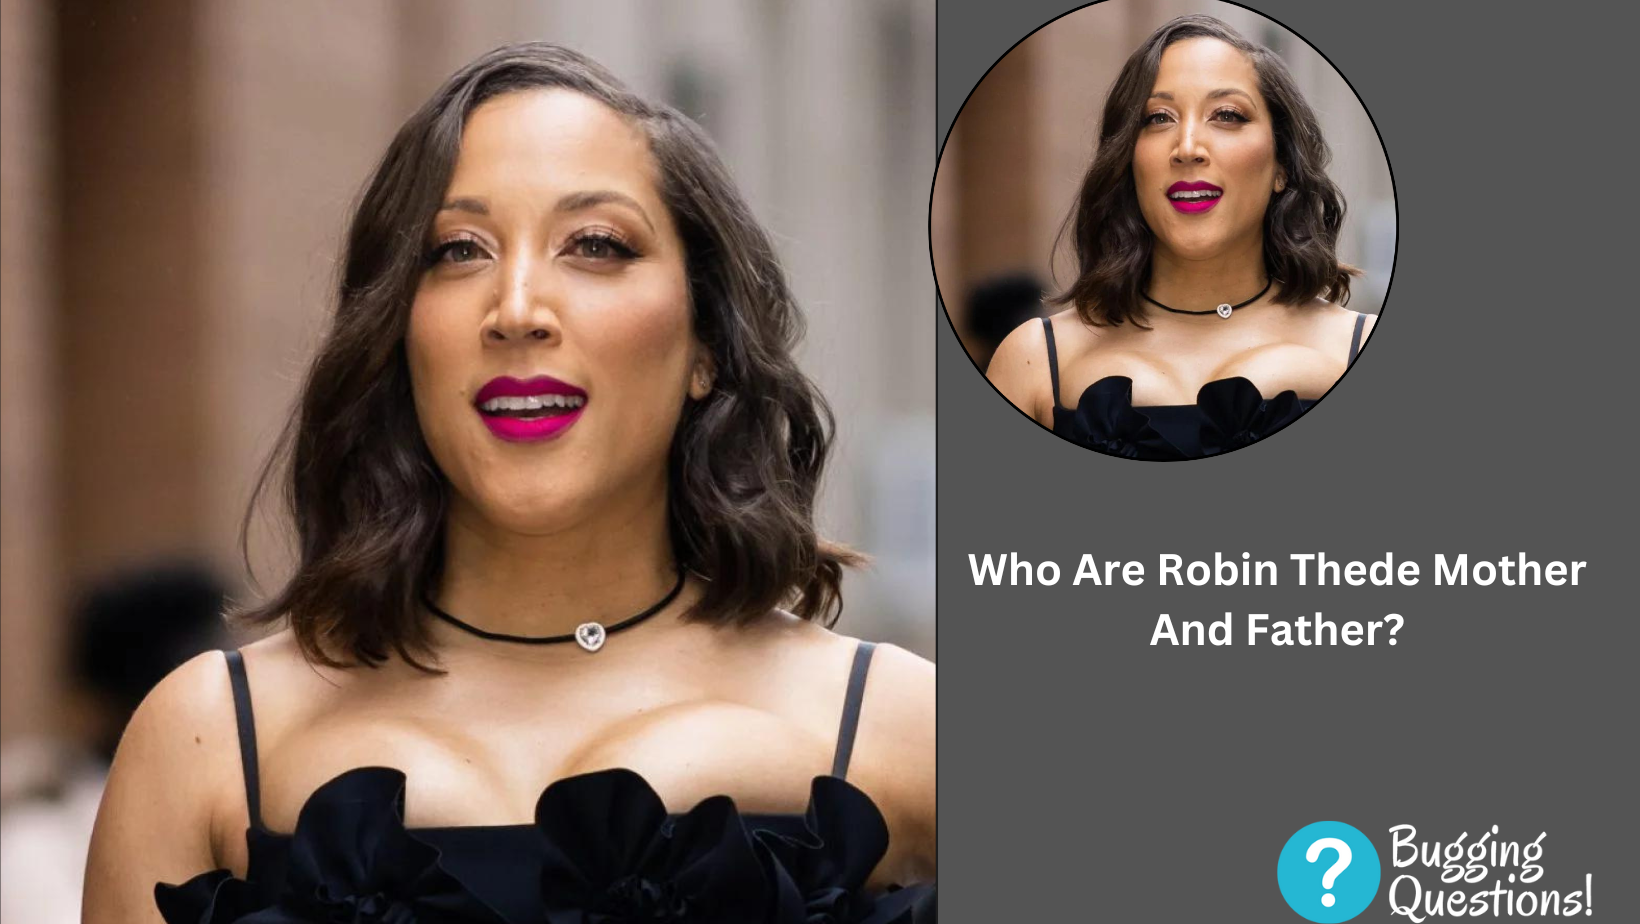 Who Are Robin Thede Mother And Father?